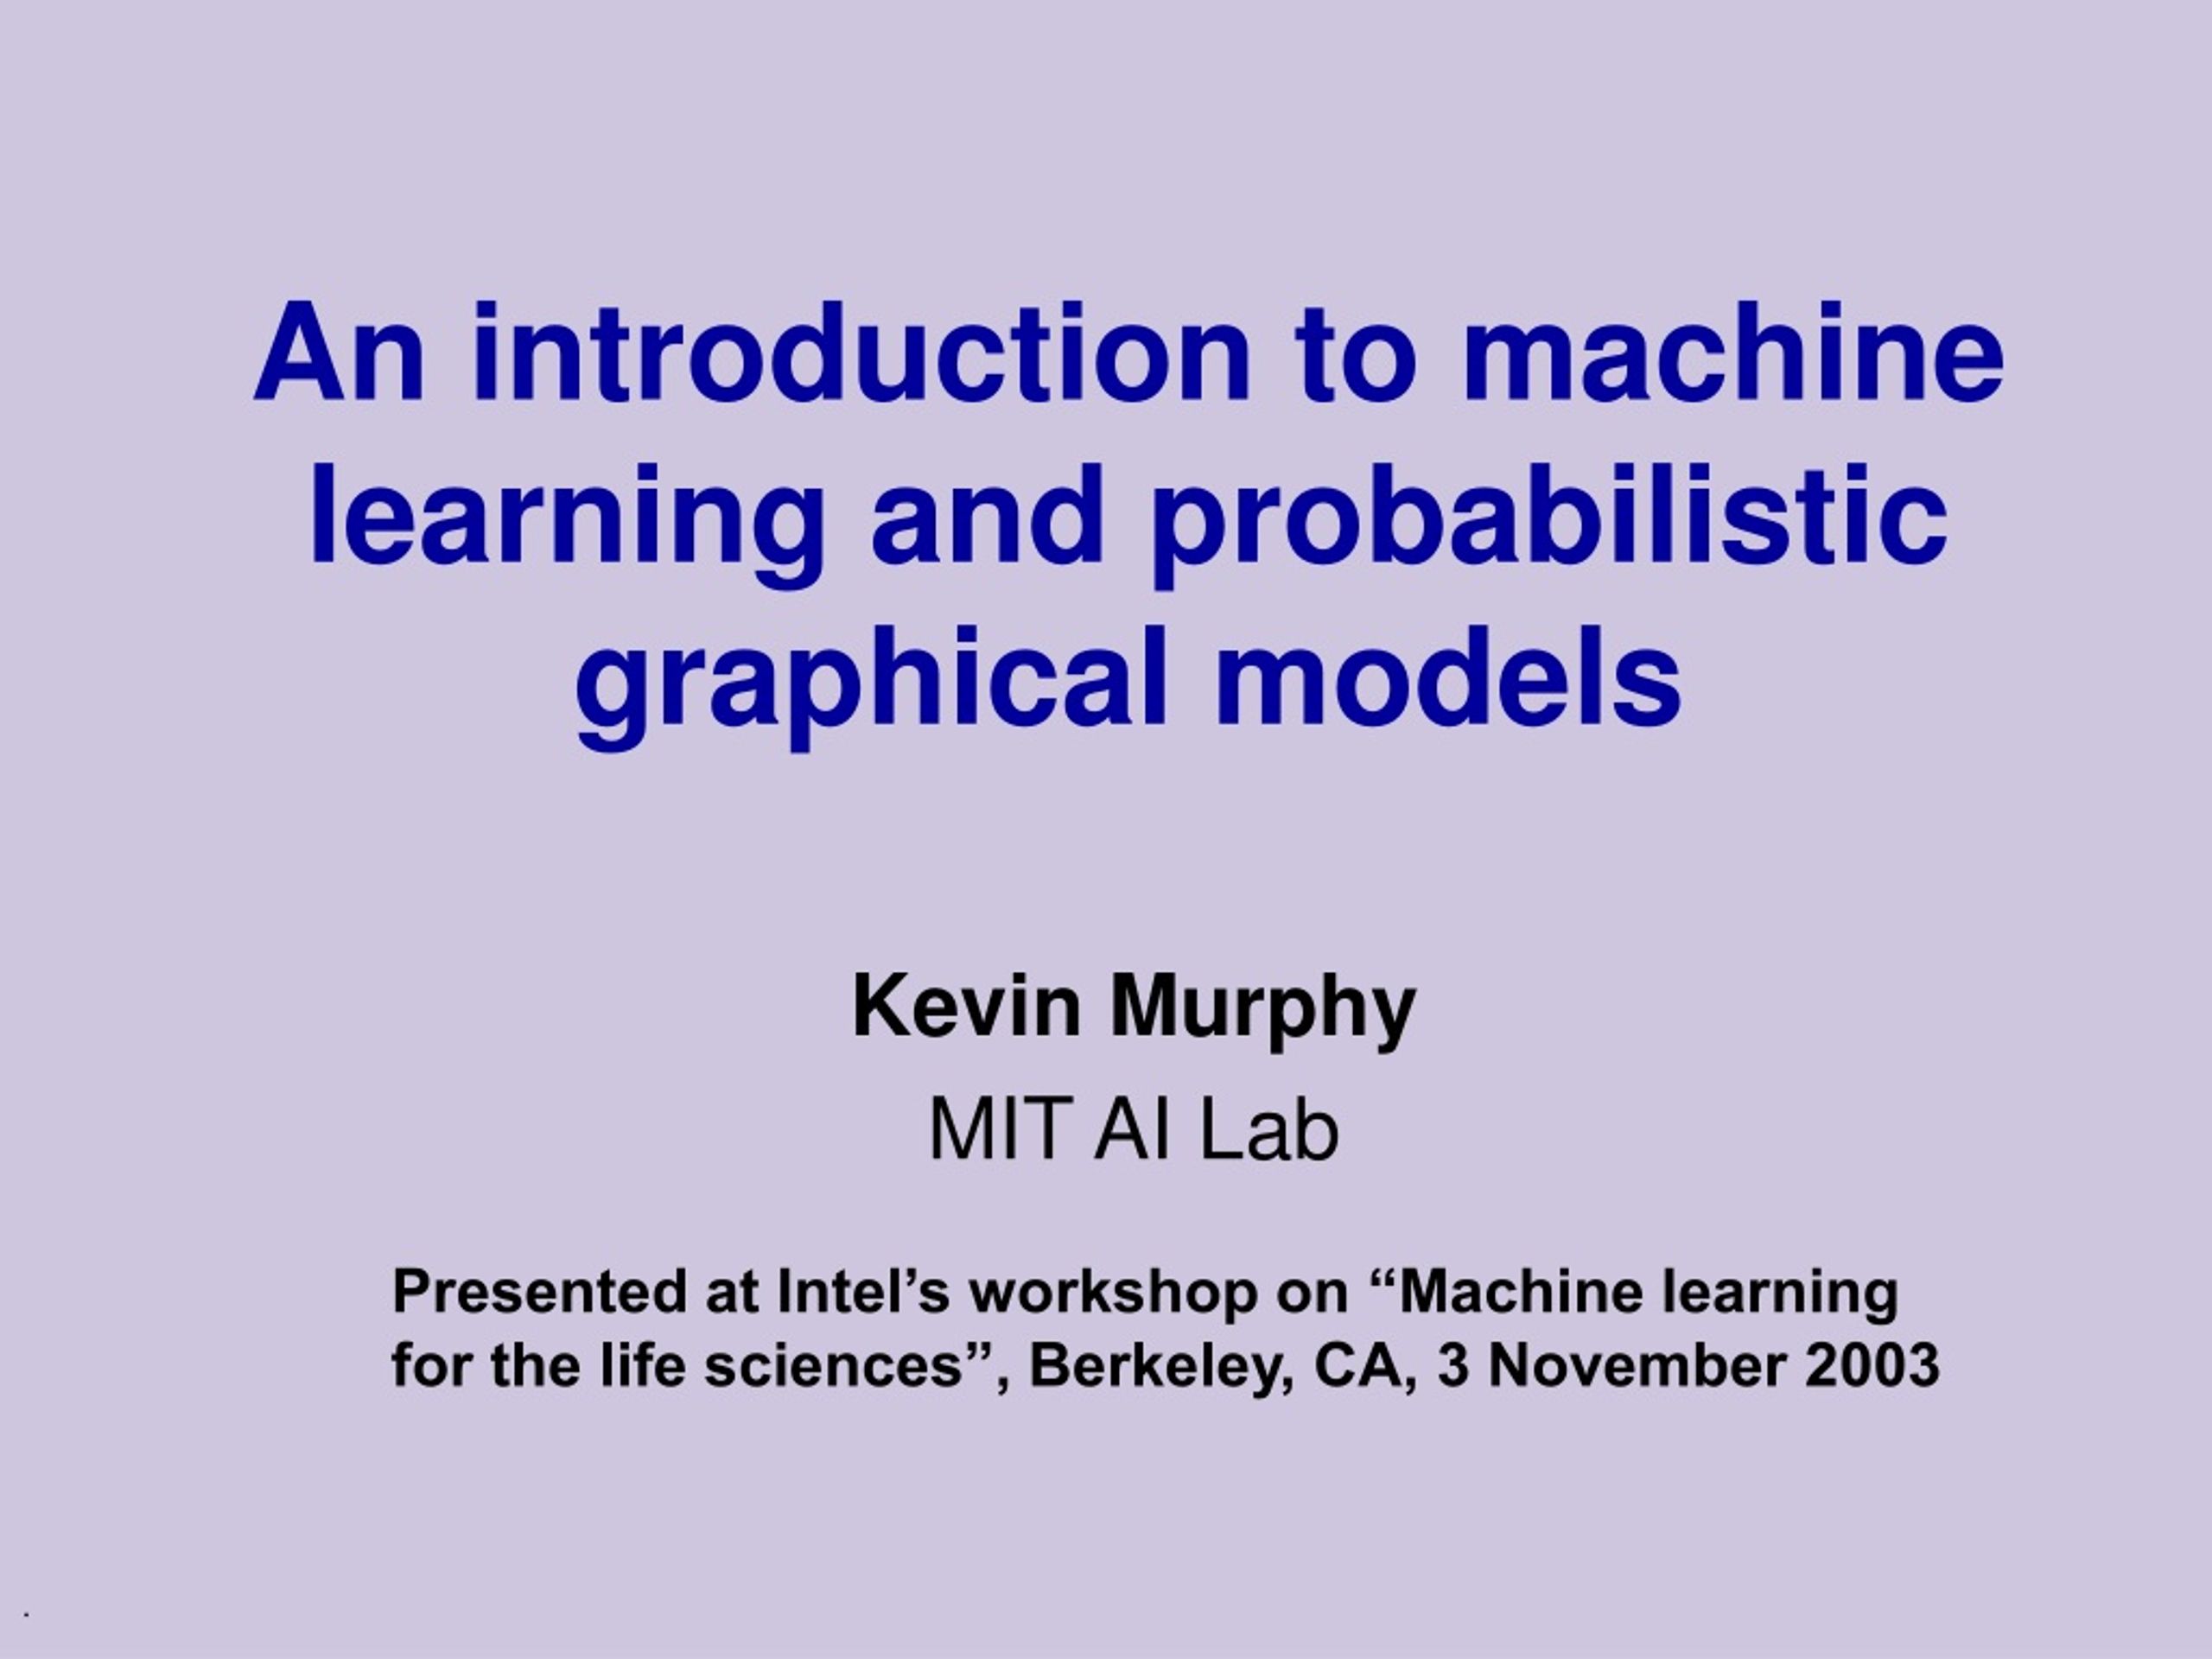 PPT - An introduction to machine learning and probabilistic graphical ...